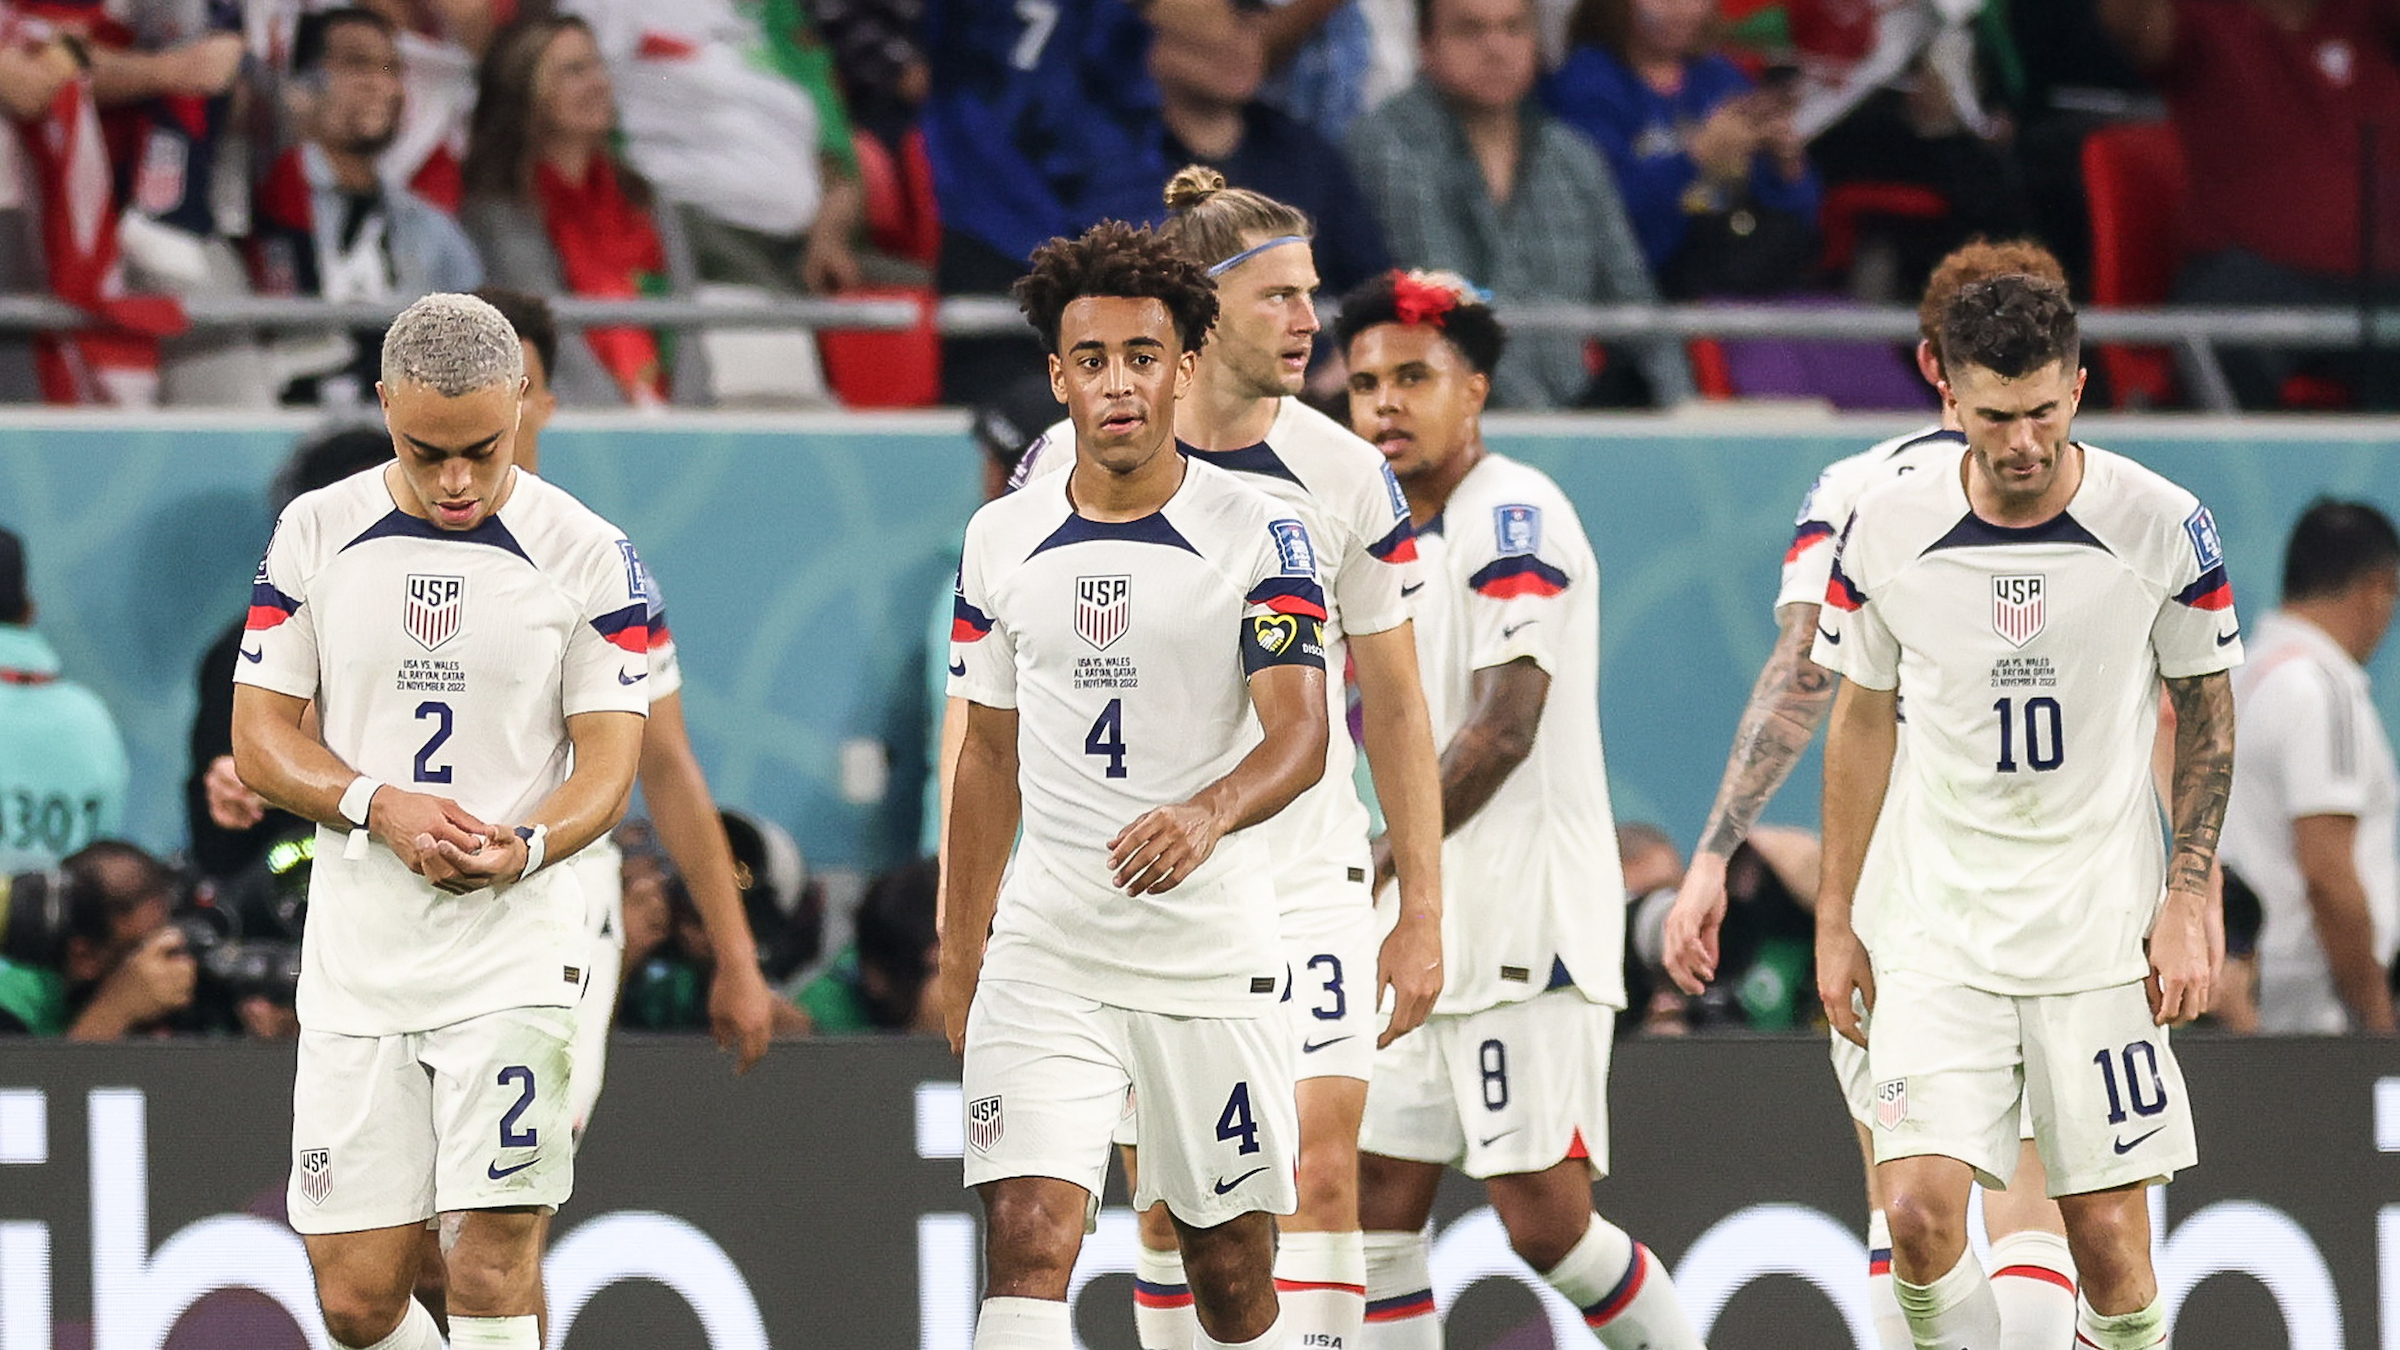 USMNT plays Wales to 1-1 draw in FIFA World Cup opener - SoccerWire